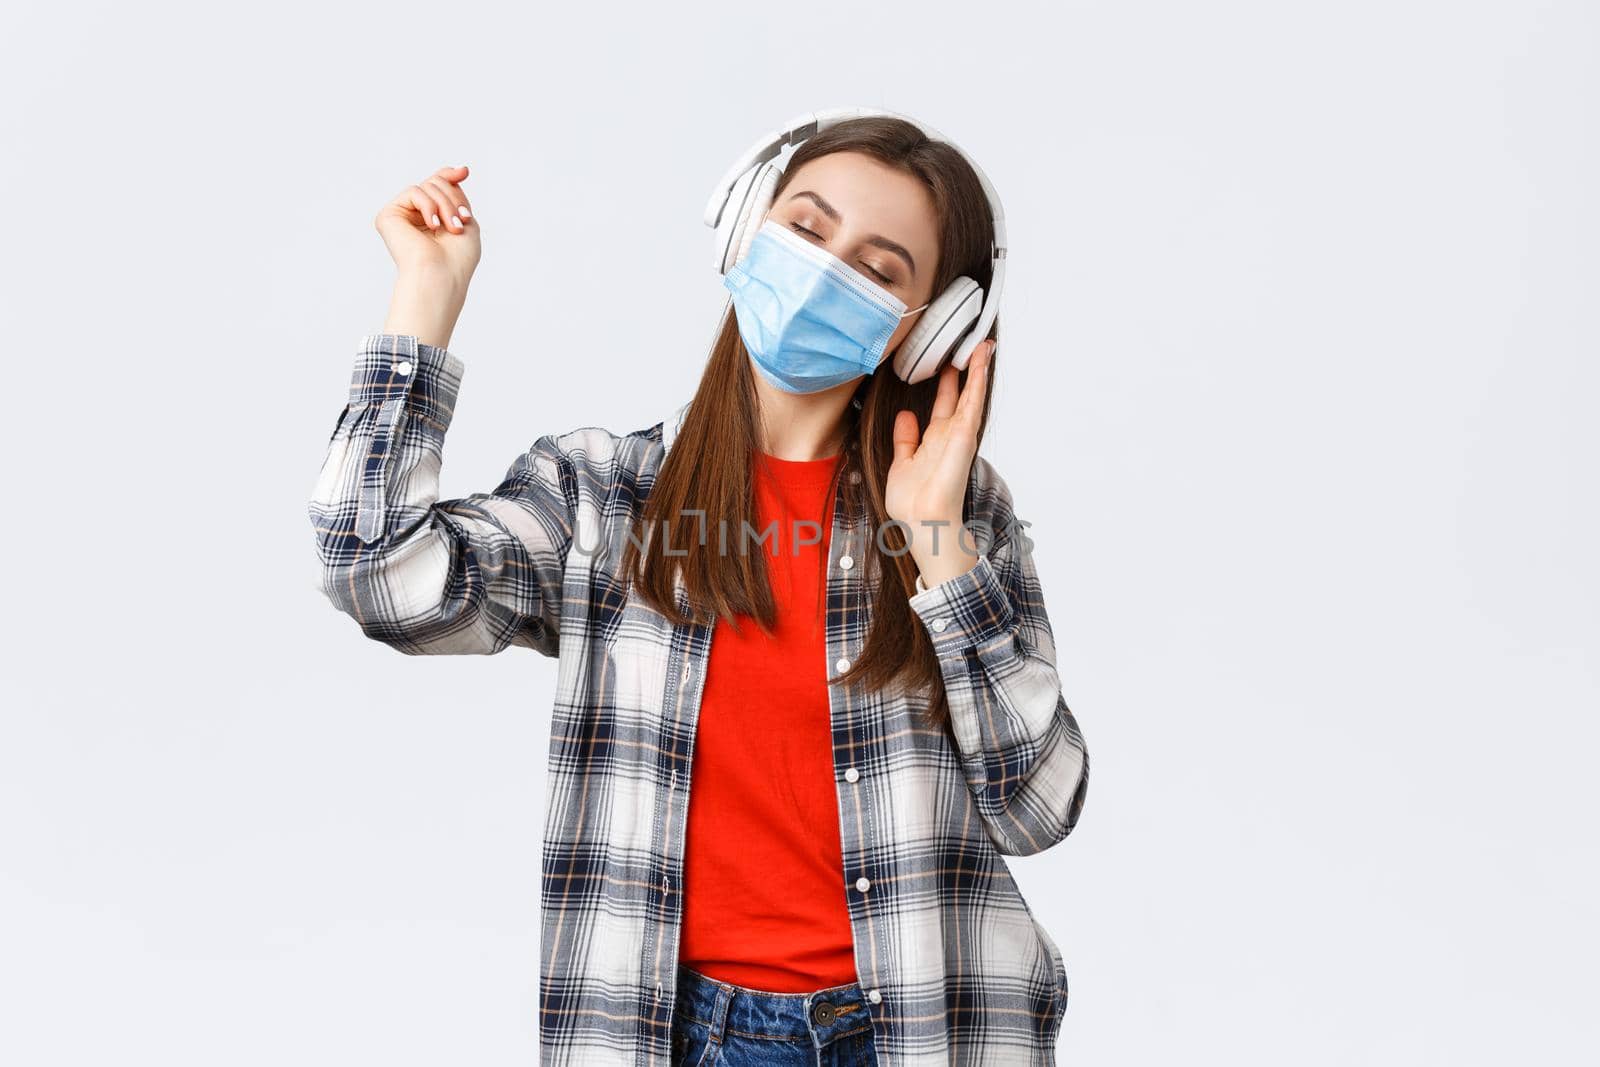 Social distancing, leisure and lifestyle on covid-19 outbreak, coronavirus concept. Carefree tender young woman carried away listening music in headphones, dancing with closed eyes in medical mask by Benzoix